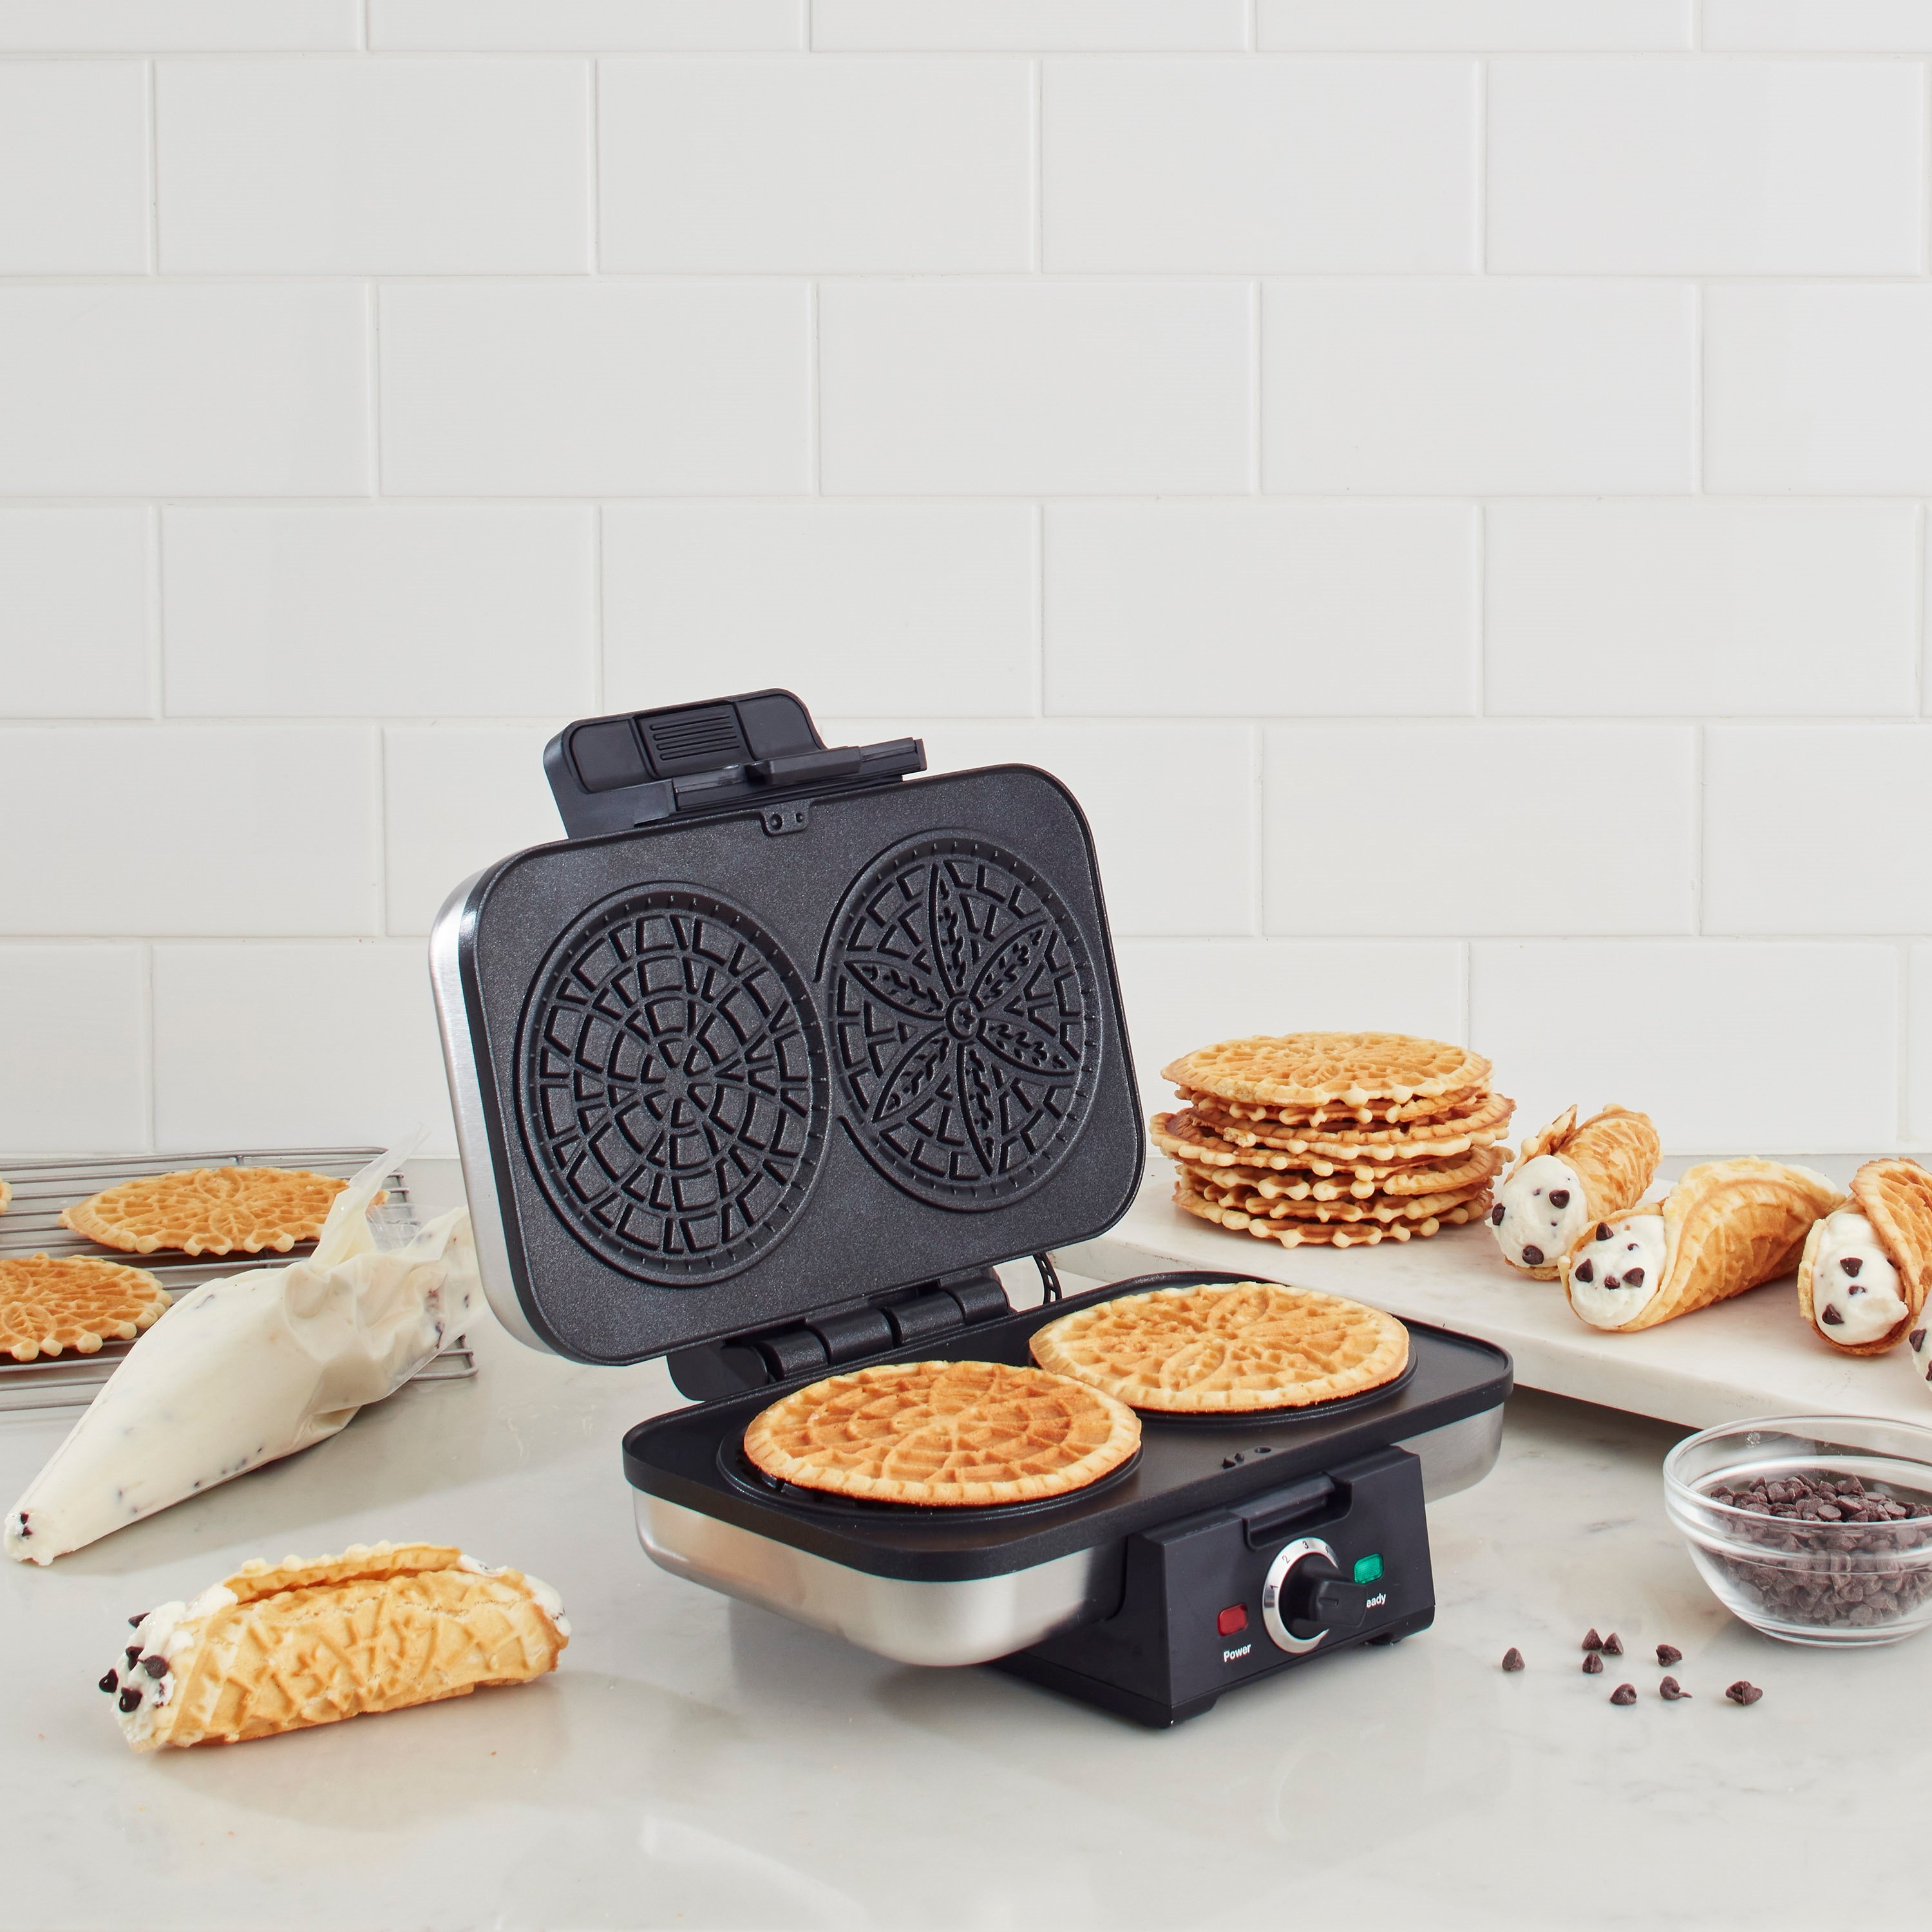 I could use an electric pizzelle iron, but this is my idea of a